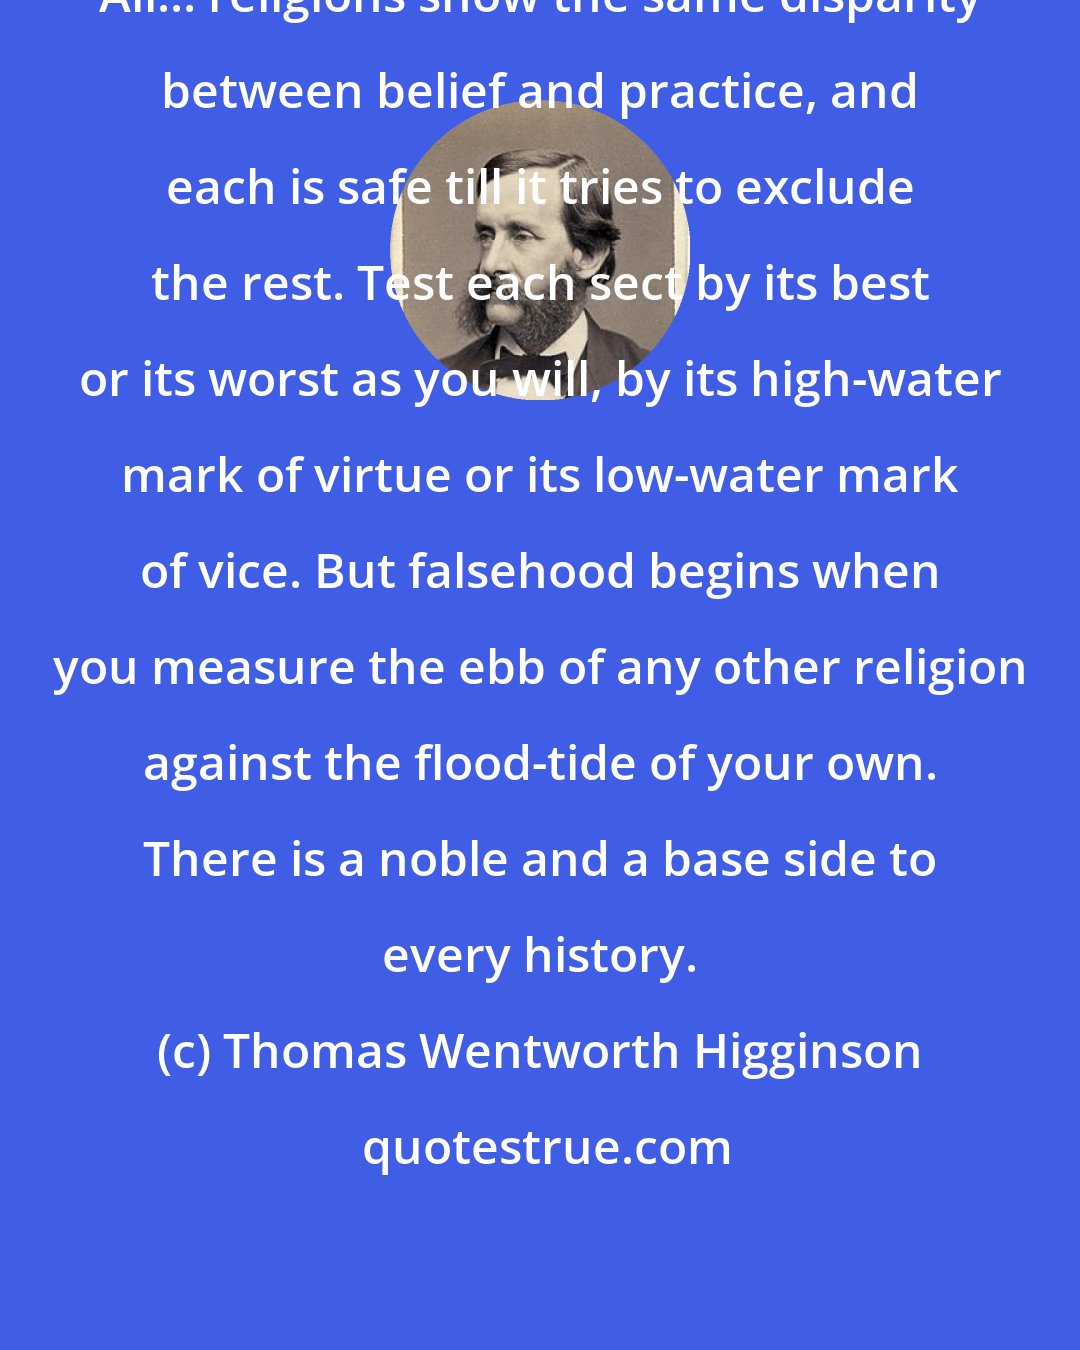 Thomas Wentworth Higginson: All... religions show the same disparity between belief and practice, and each is safe till it tries to exclude the rest. Test each sect by its best or its worst as you will, by its high-water mark of virtue or its low-water mark of vice. But falsehood begins when you measure the ebb of any other religion against the flood-tide of your own. There is a noble and a base side to every history.